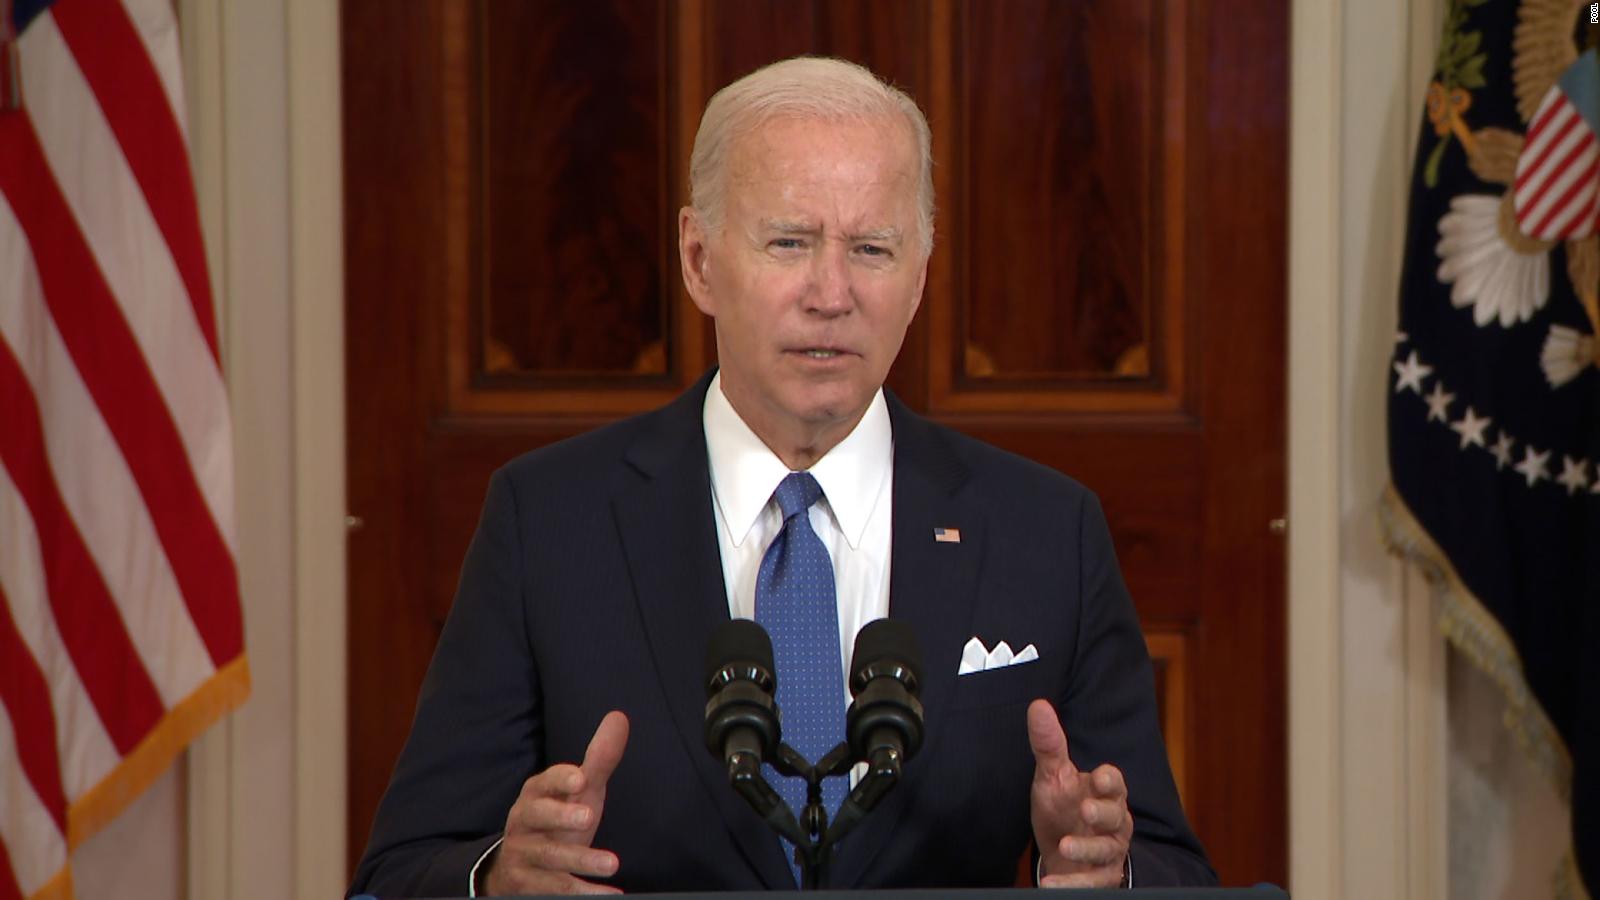 Biden says “women’s health and lives” are at risk after Supreme Court overturns Roe v.  Wade